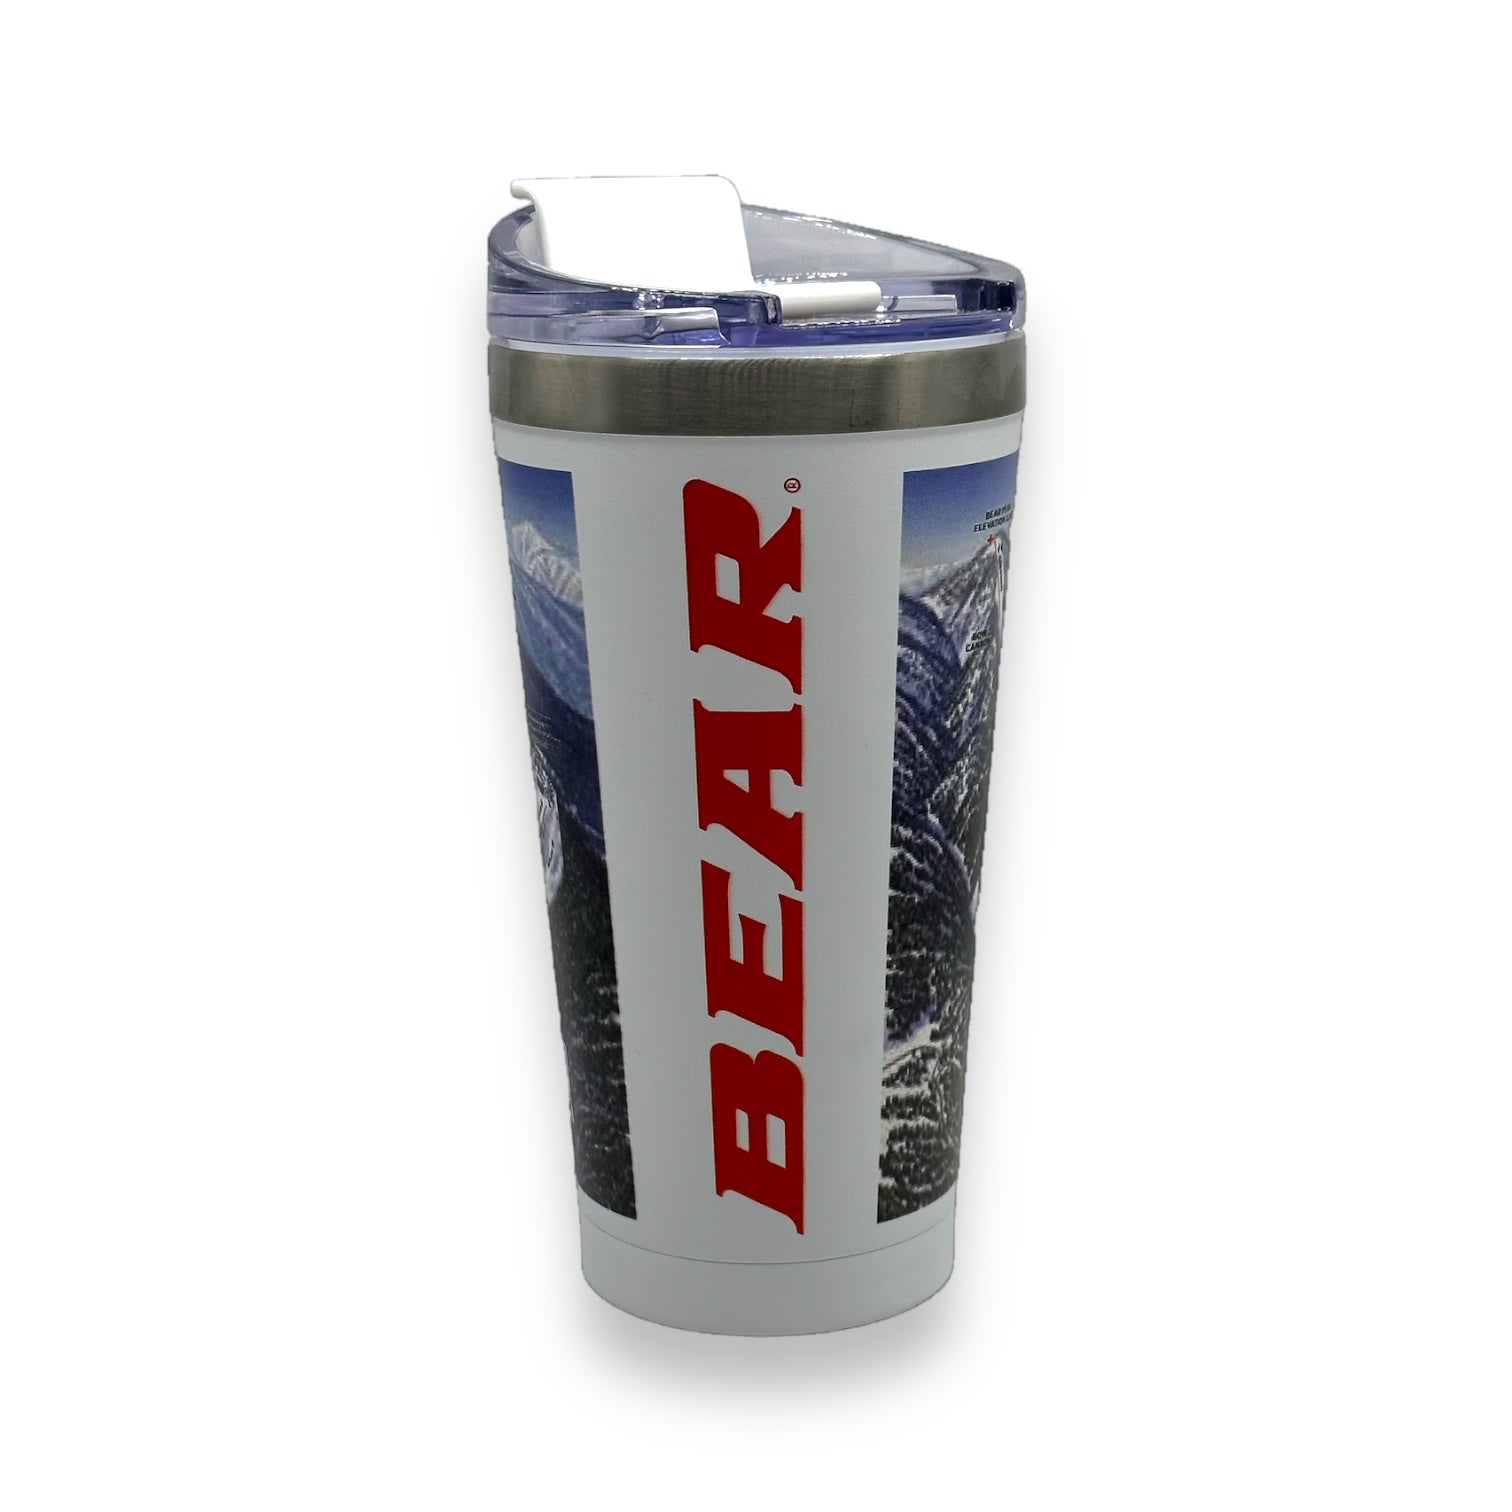 Bear Mountain trails map tumbler with white base and Bear writing on side